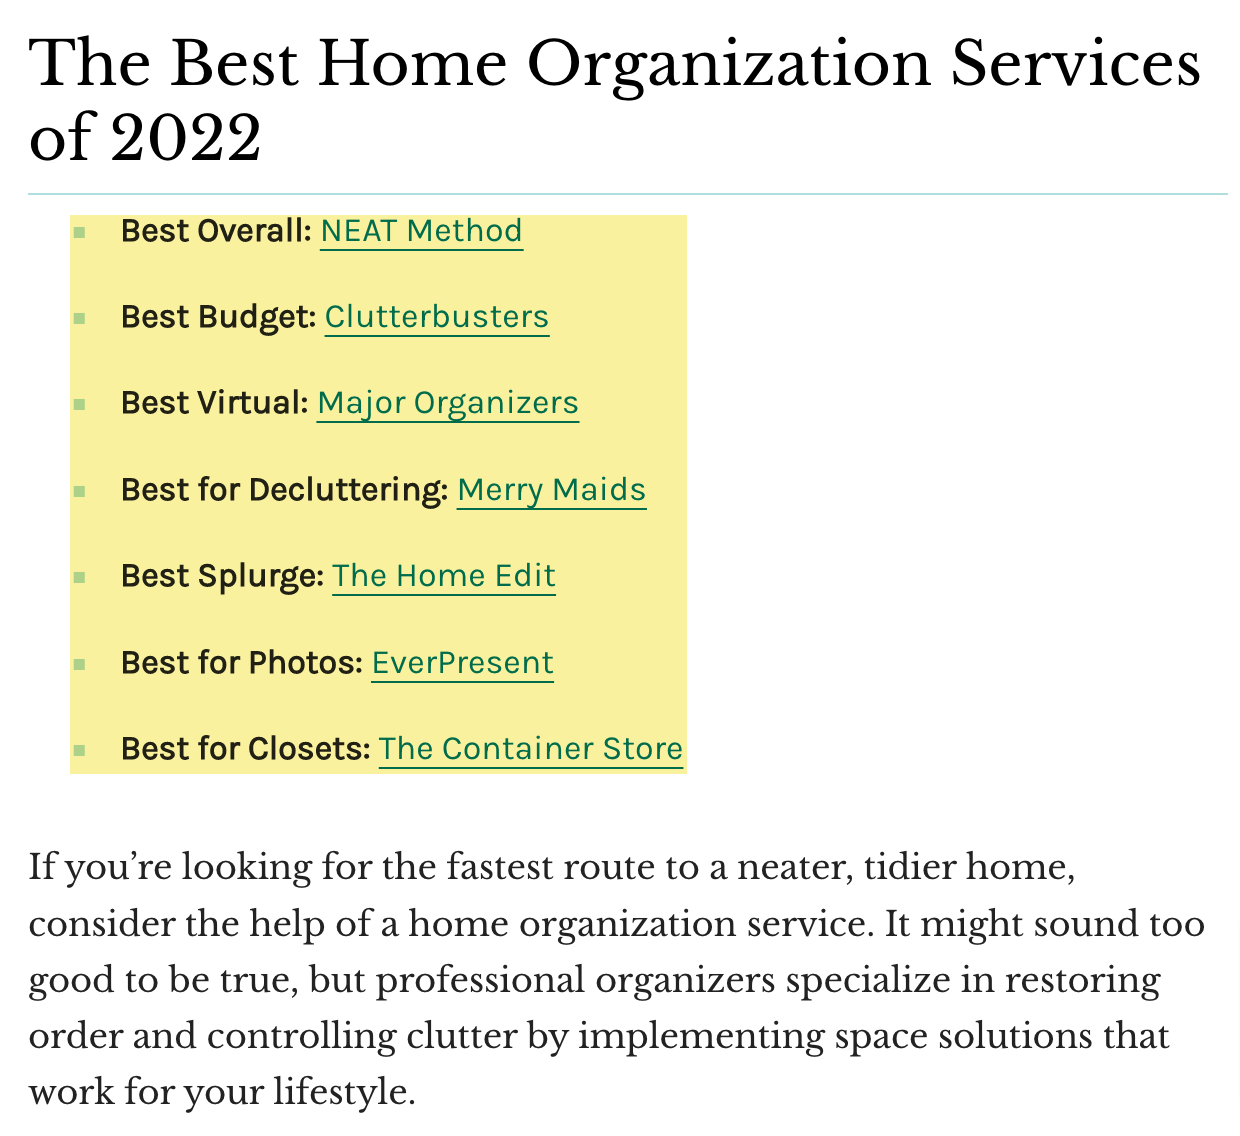 Home organization businesses ranking